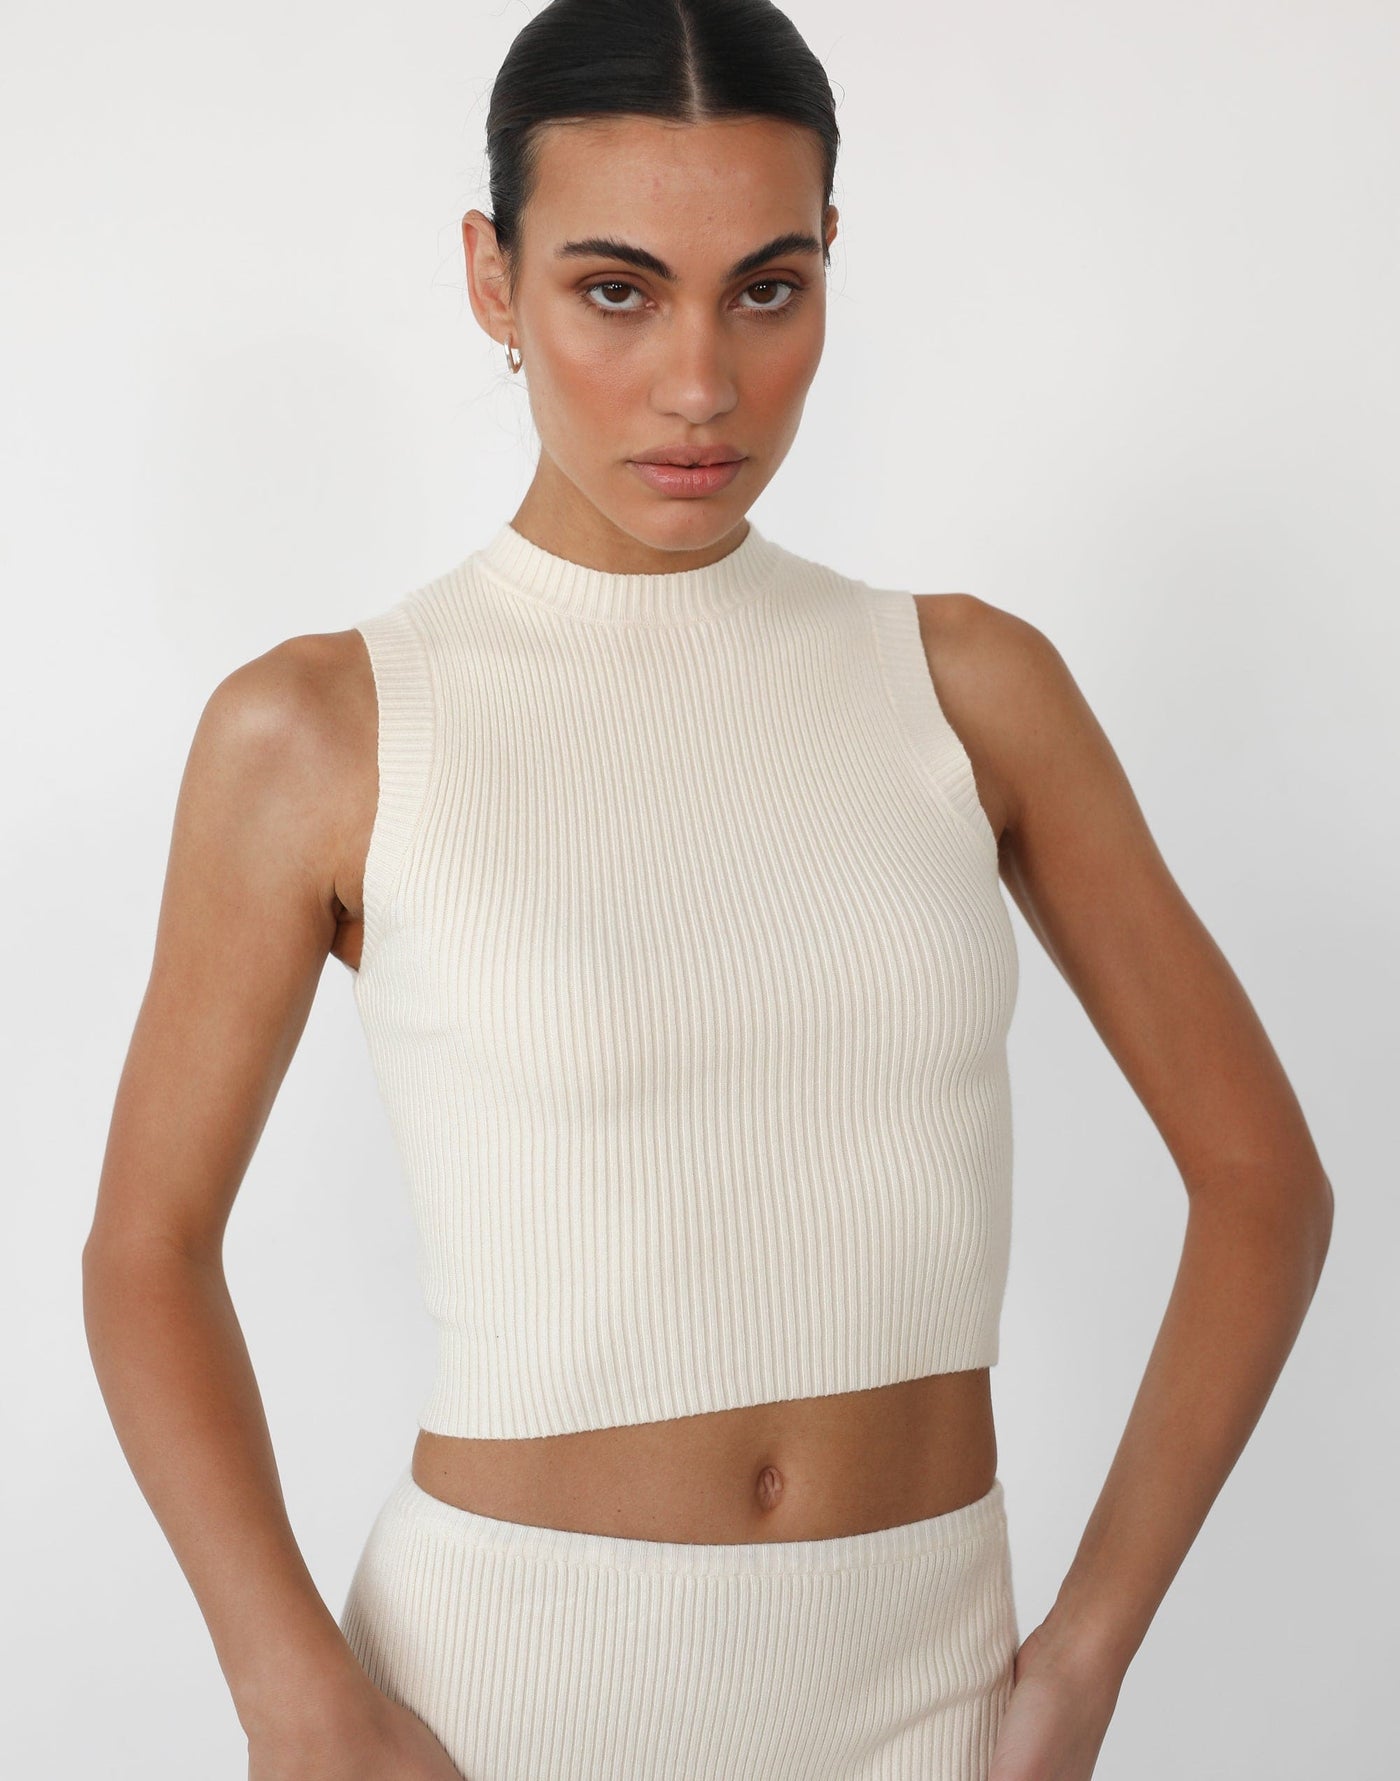 Nate Knit Tank Top (Cream) - Knitted Tank Top - Women's Top - Charcoal Clothing